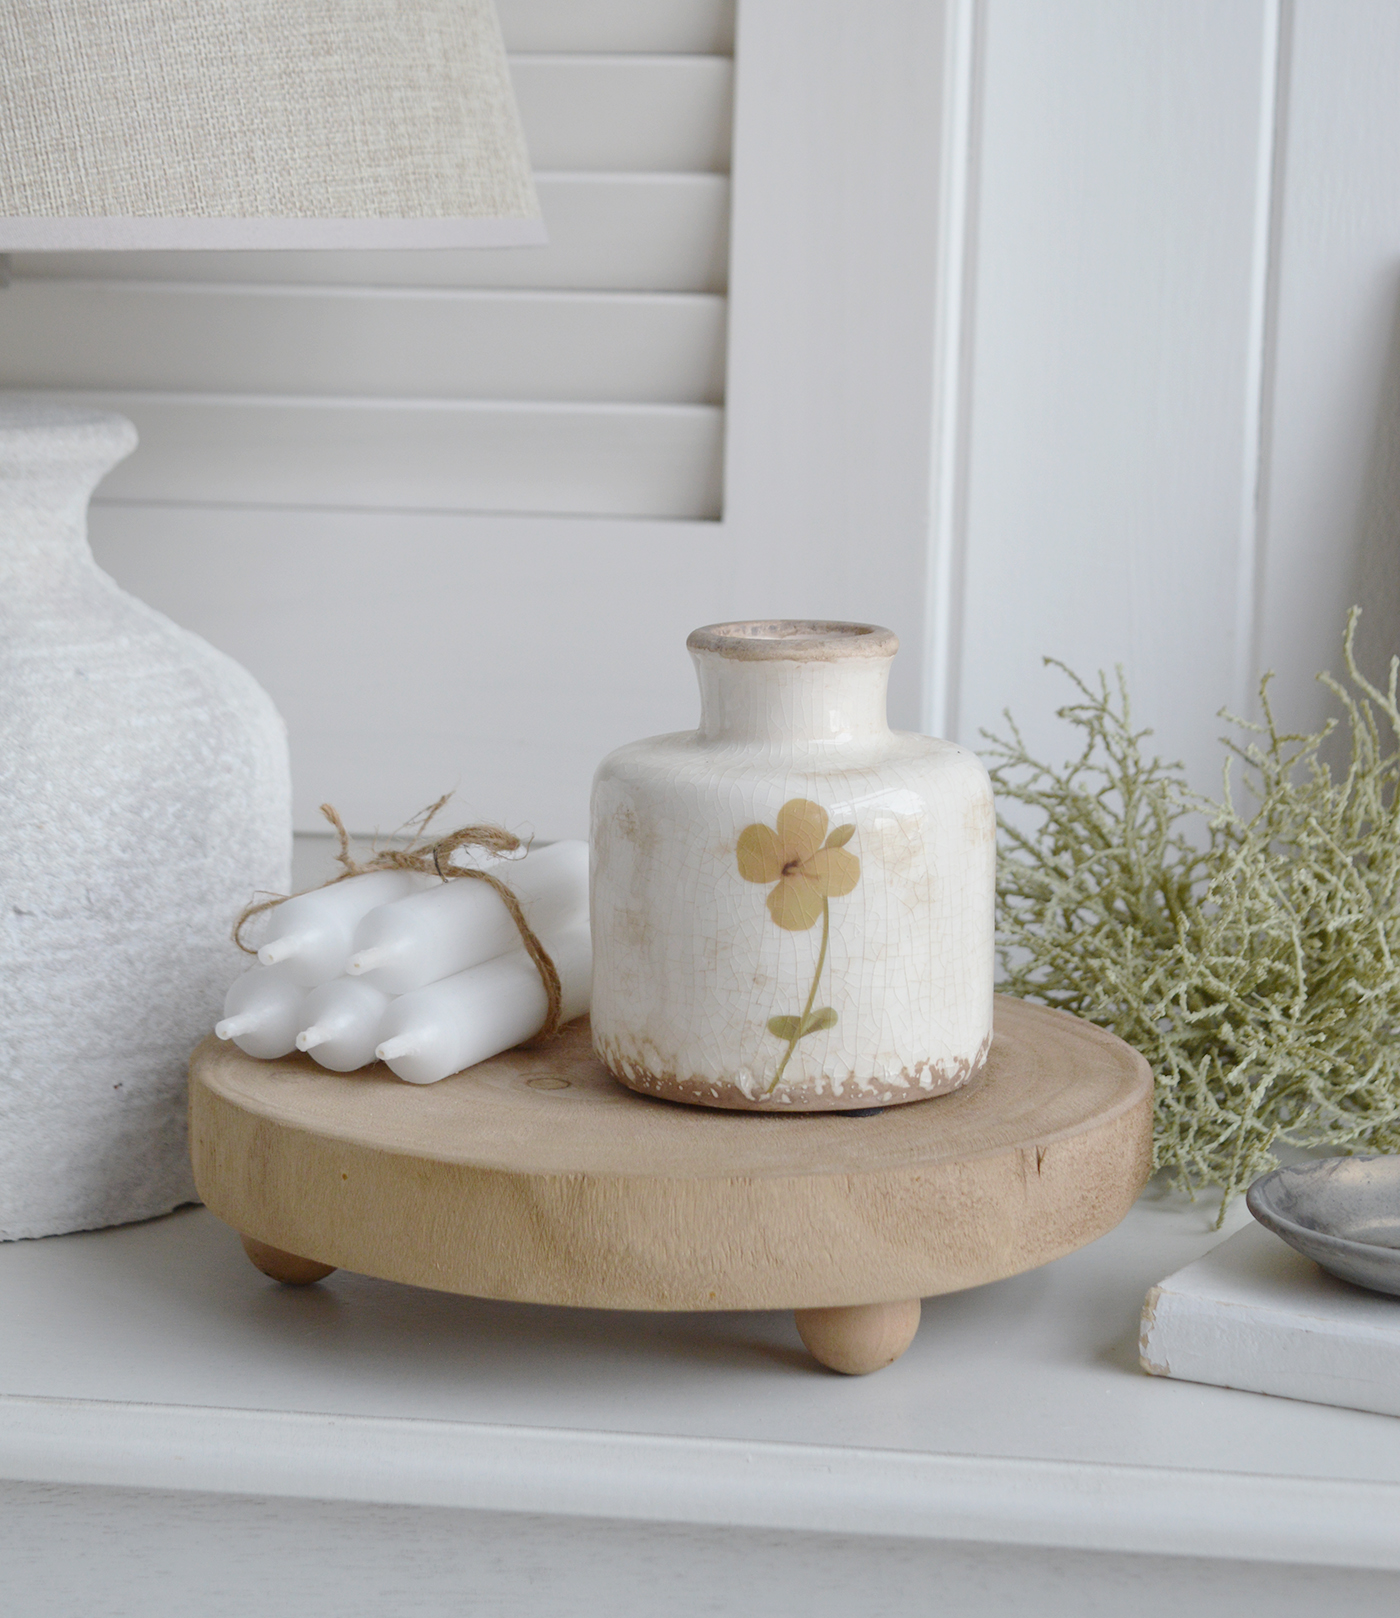 Charlotte vase in simple aged white for New England, Country and coastal home interior decor